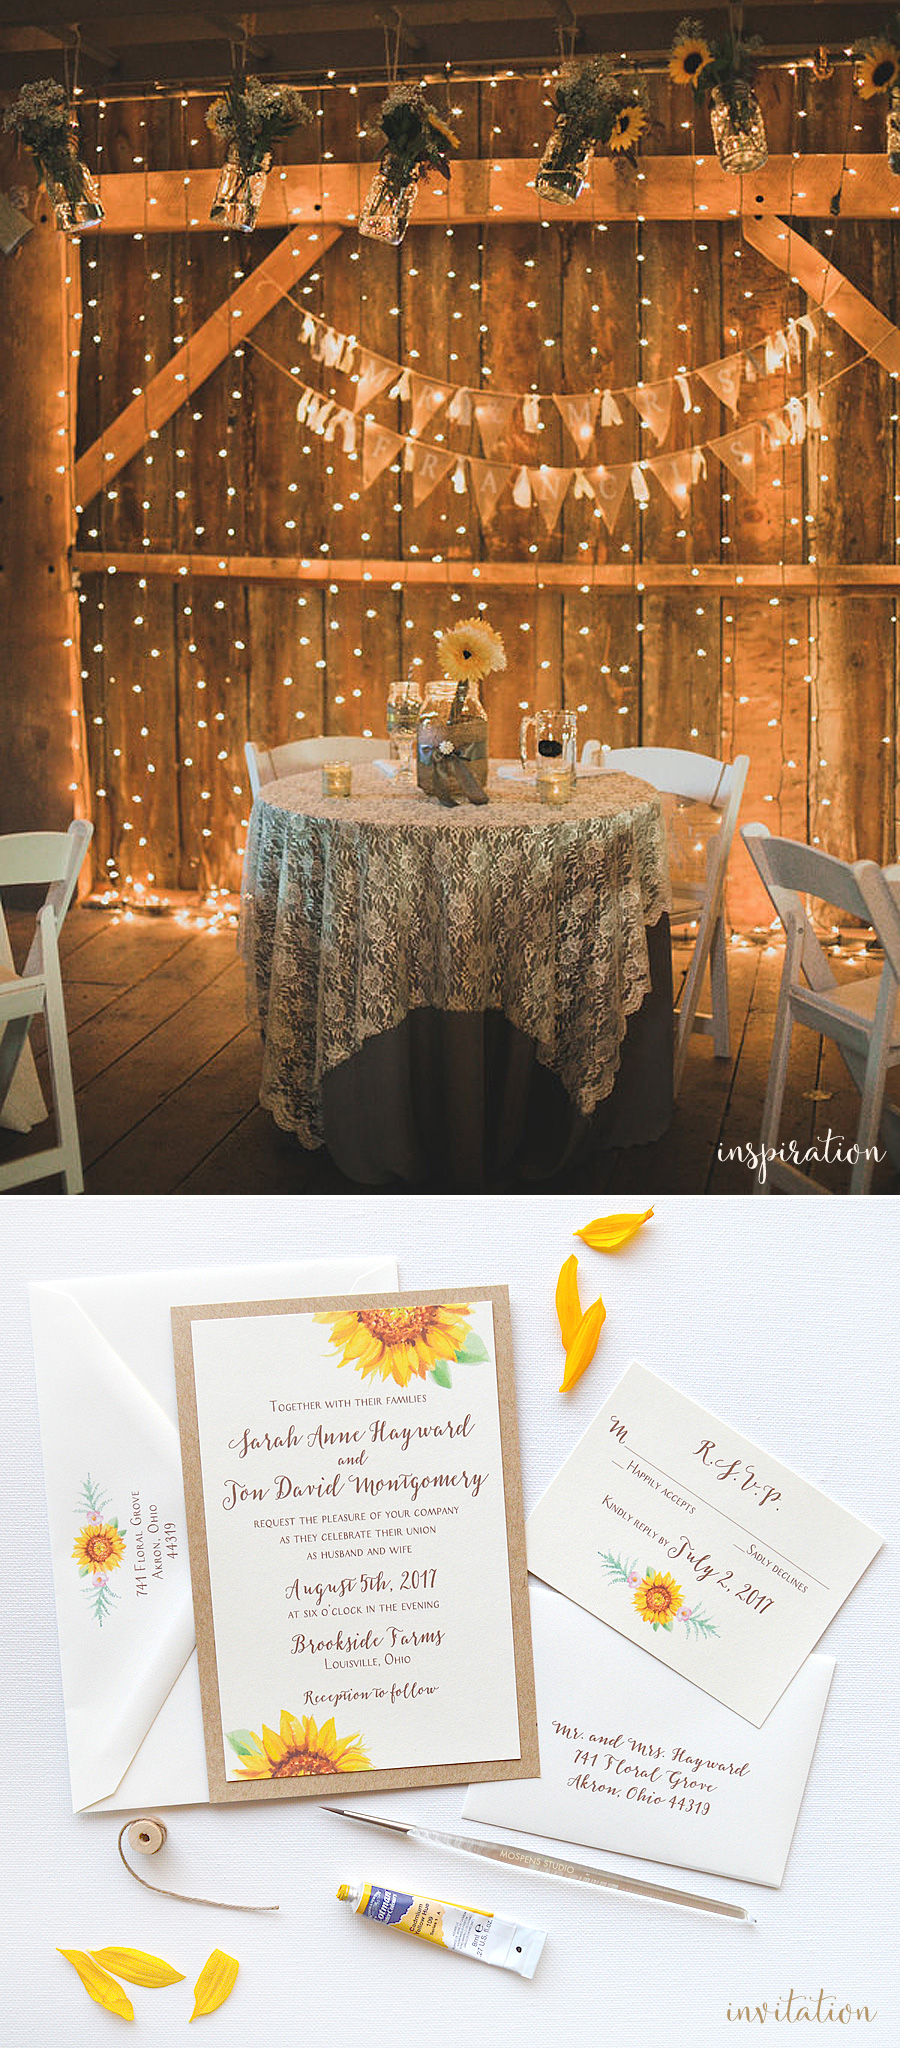 Charming rustic wedding ideas - Twinkling lights, sunflowers, lace and burlap goes perfectly with sweet watercolor sunflower wedding invitations - www.mospensstudio.com